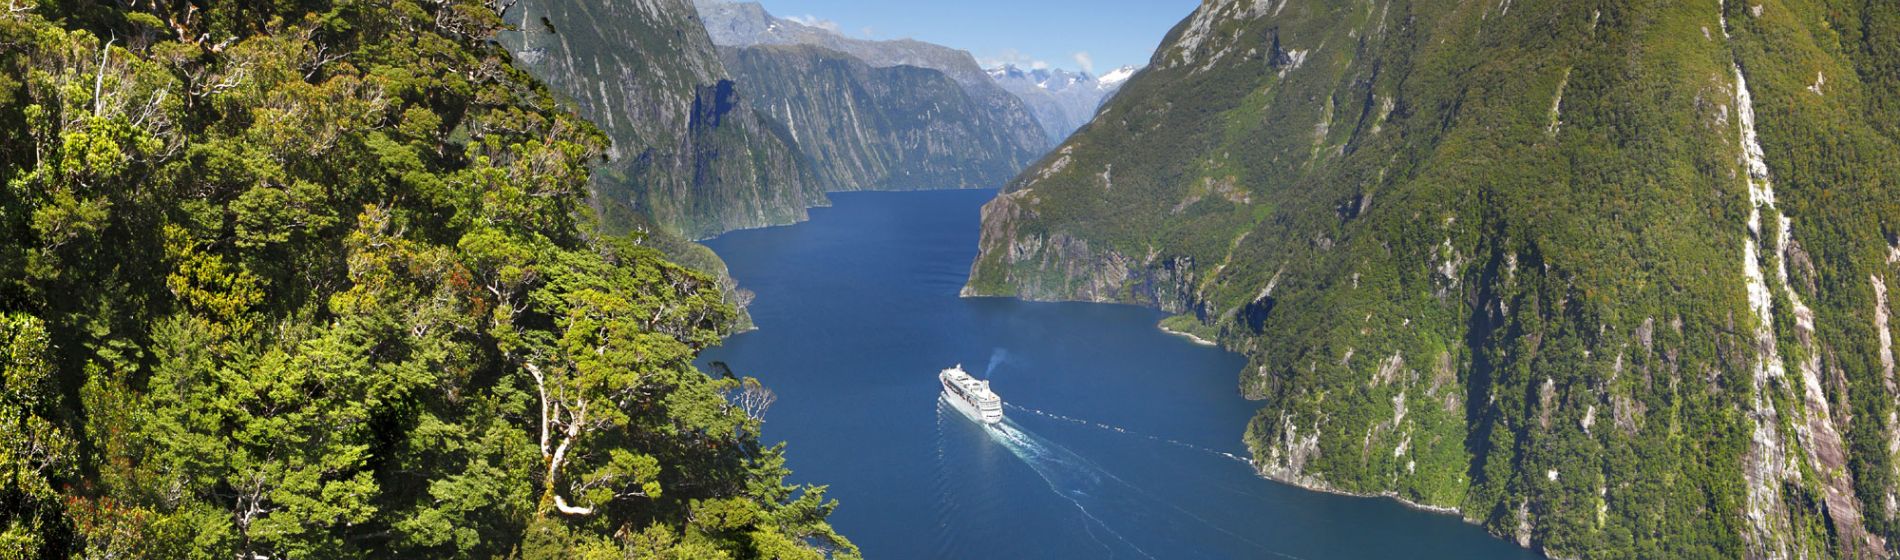 nz_si_milford_sound_4_rob_suisted.jpg